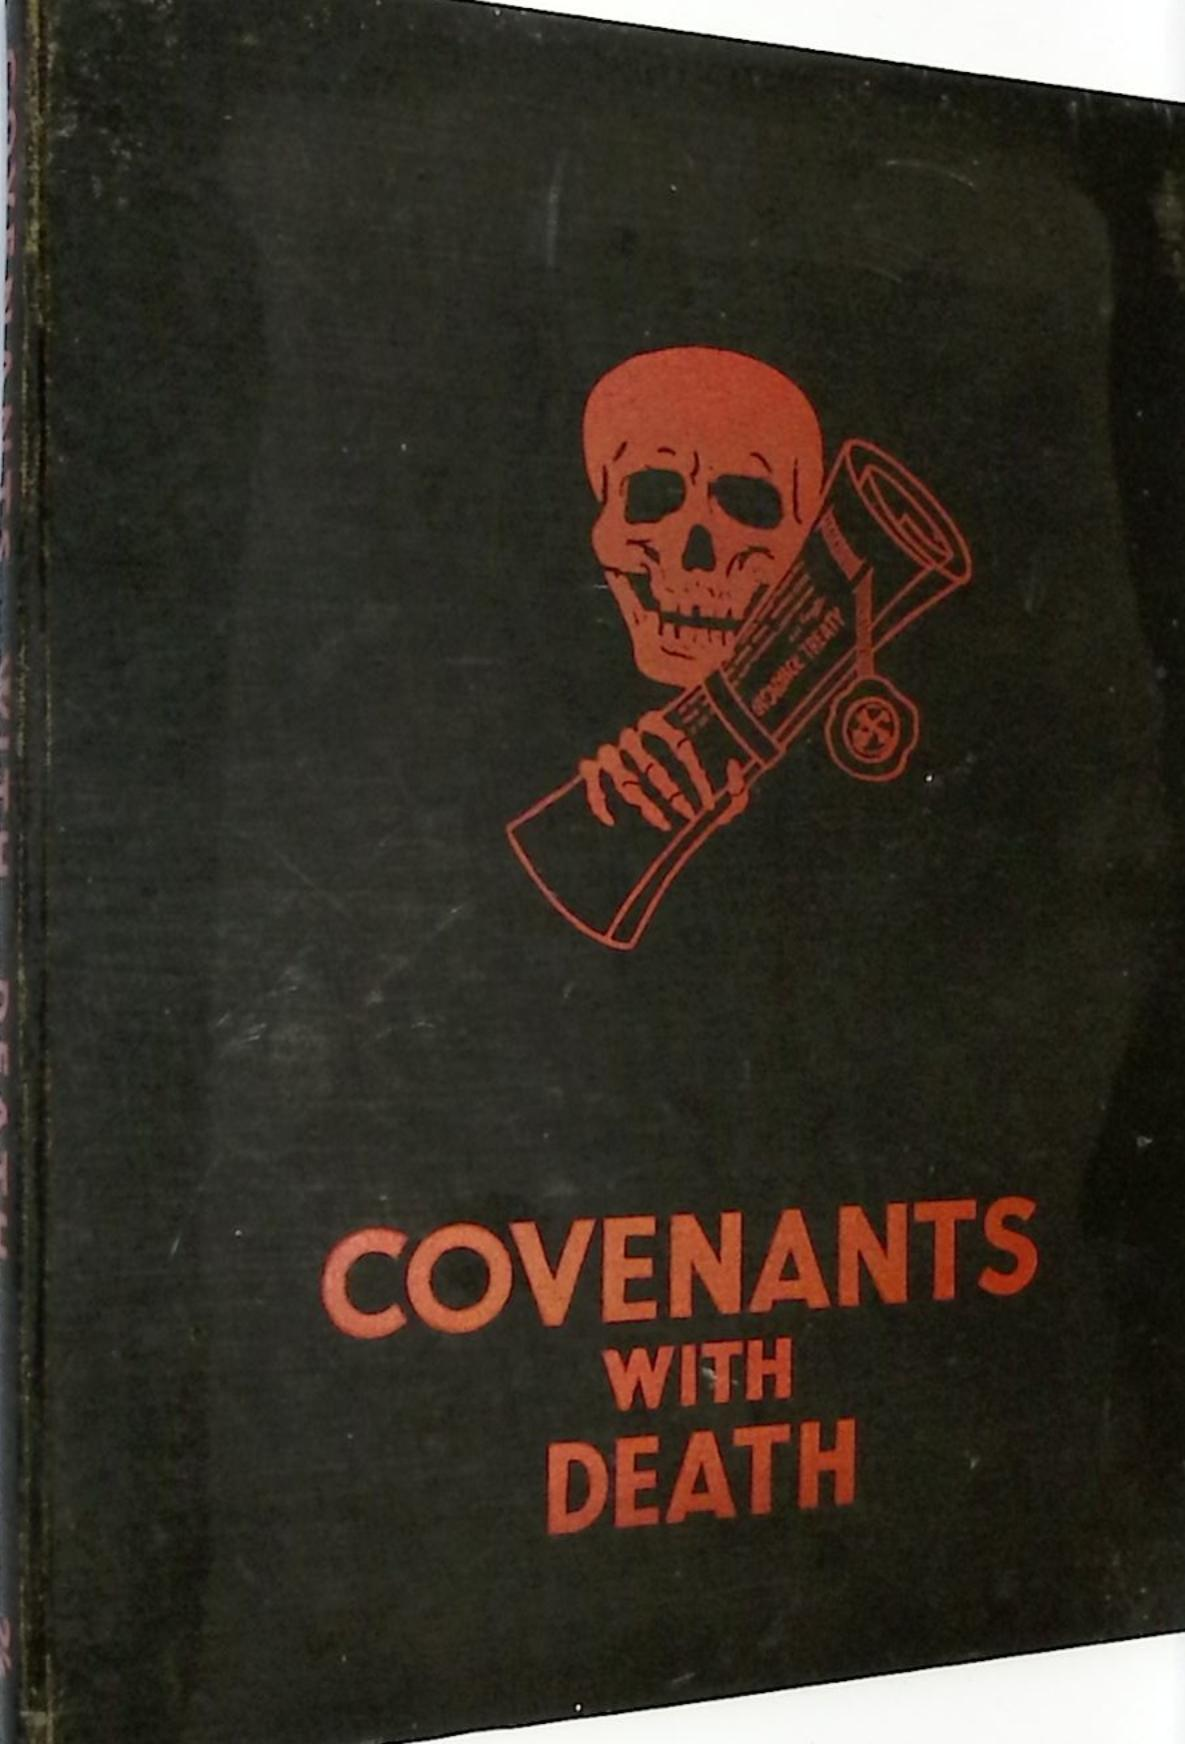 Covenants with Death